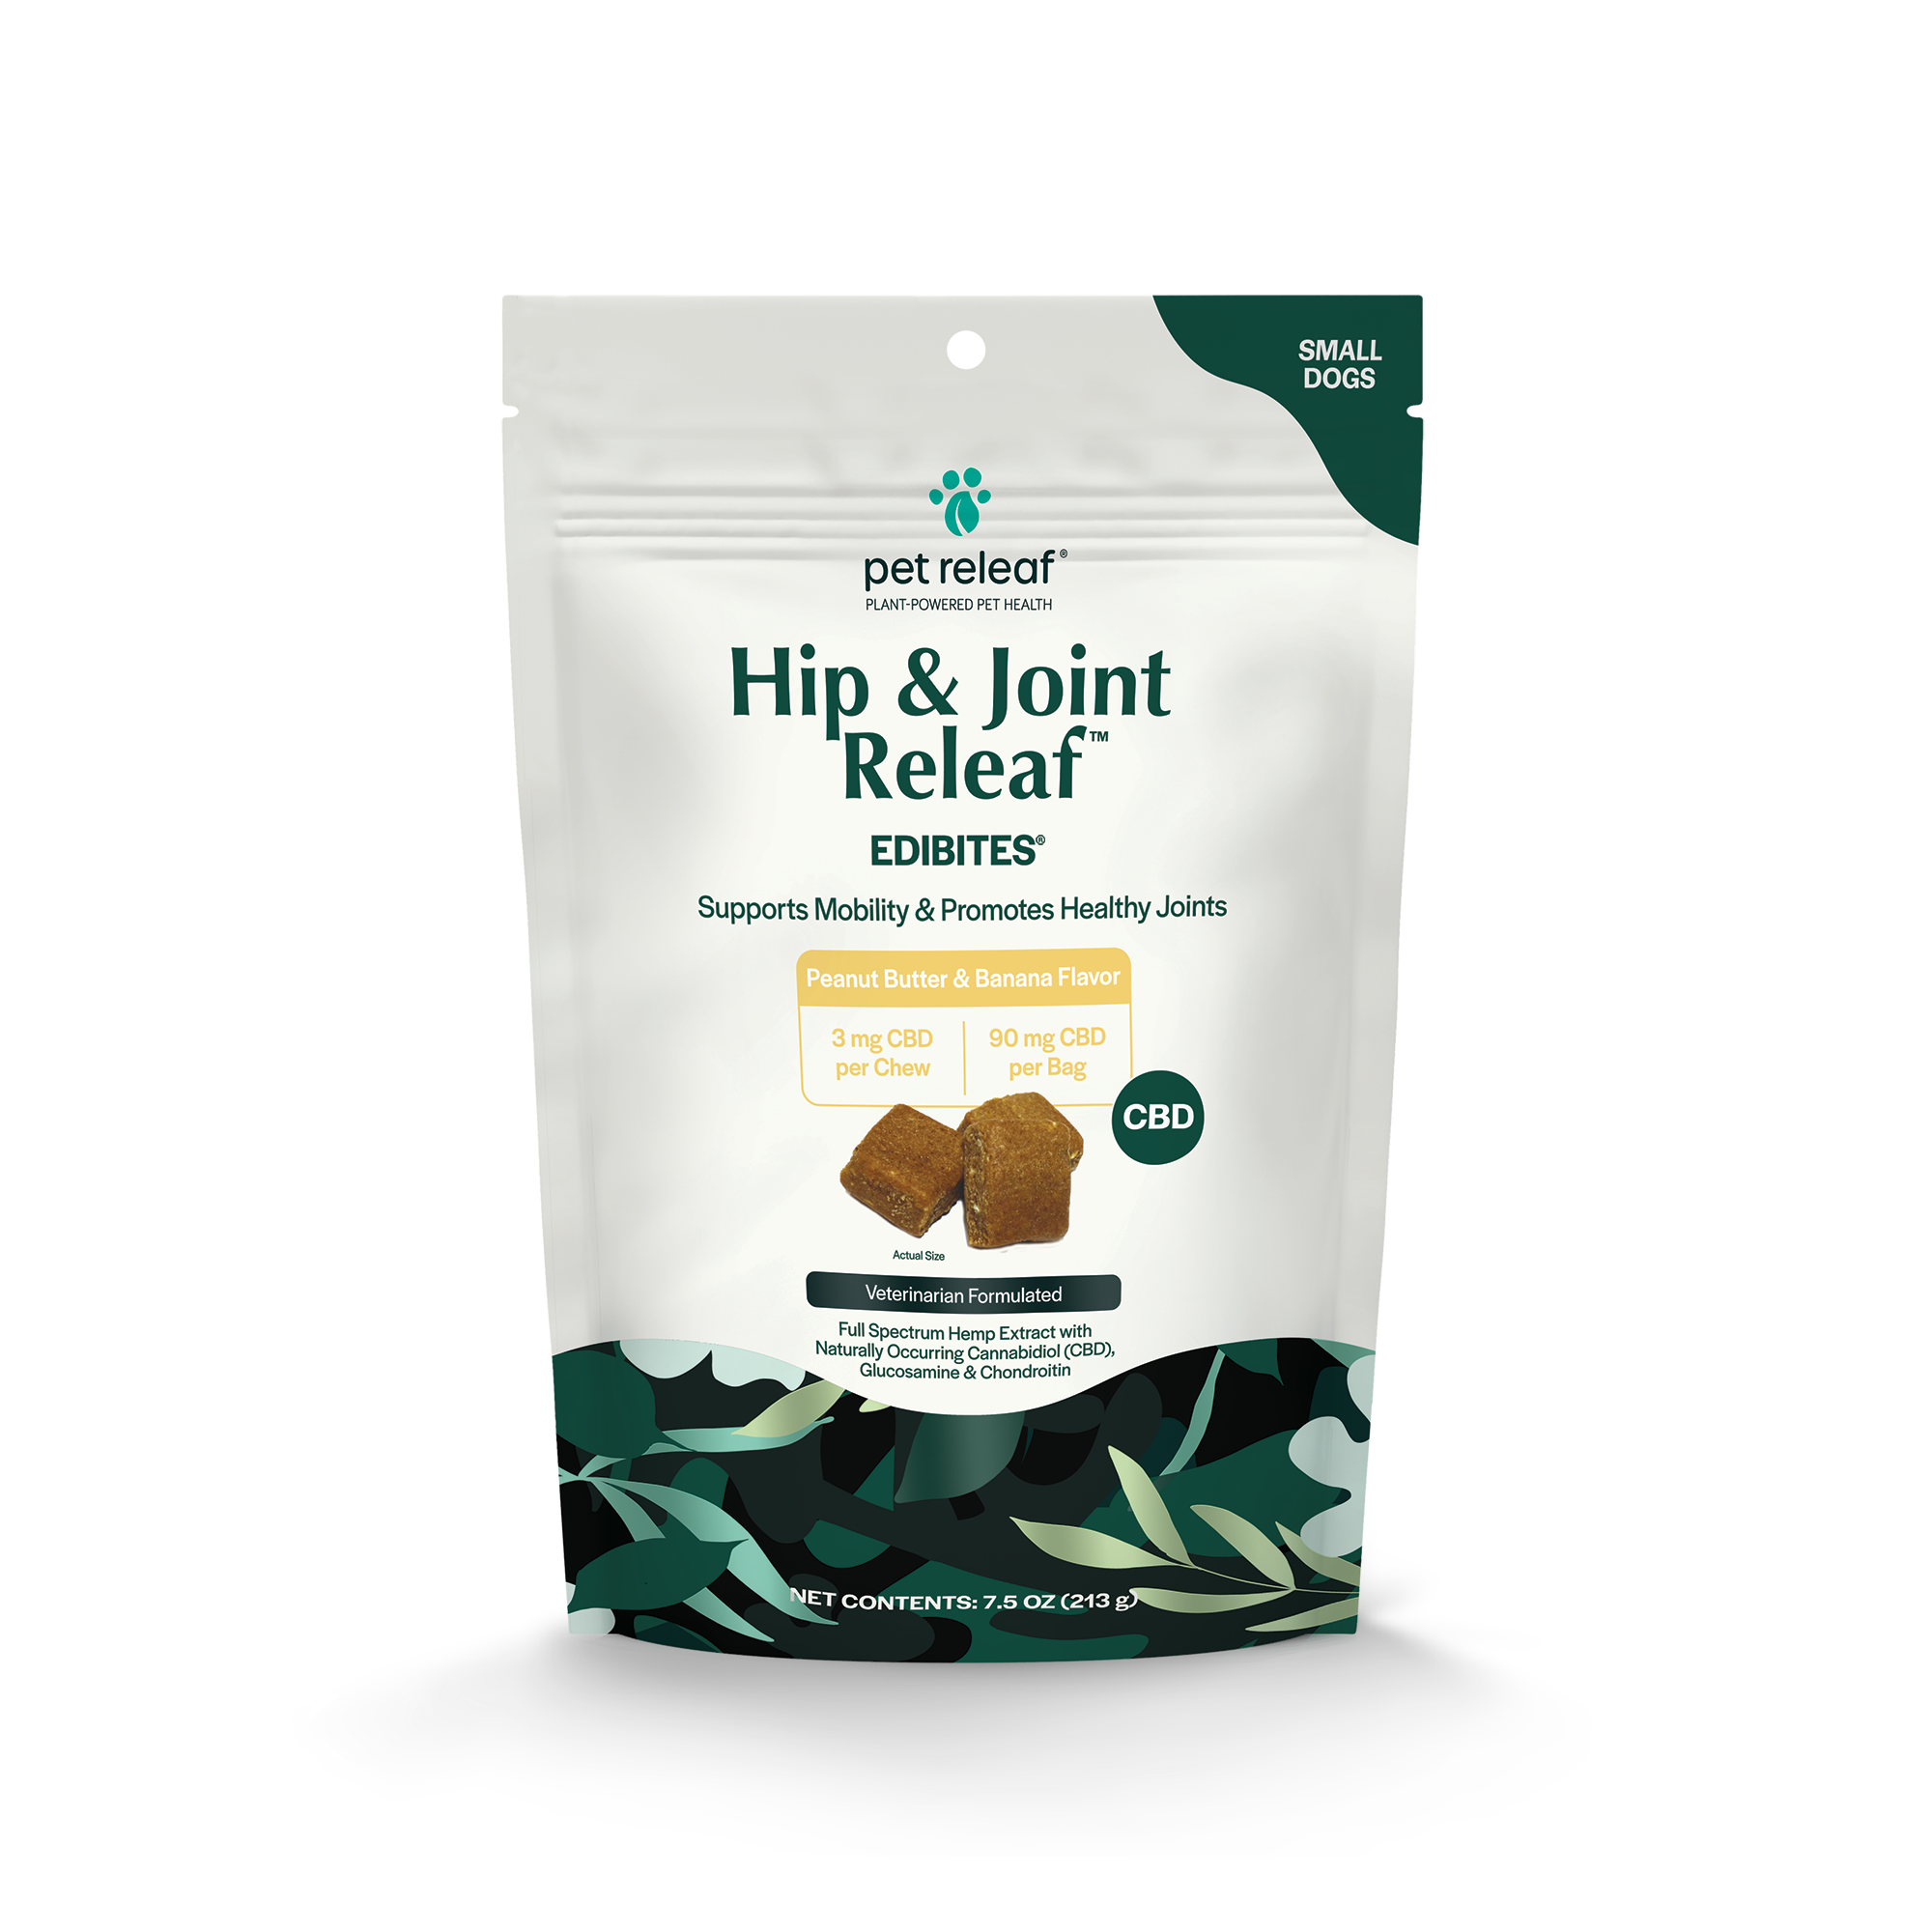 Hip and Joint Releaf for Small Dogs - PB Banana Flavor